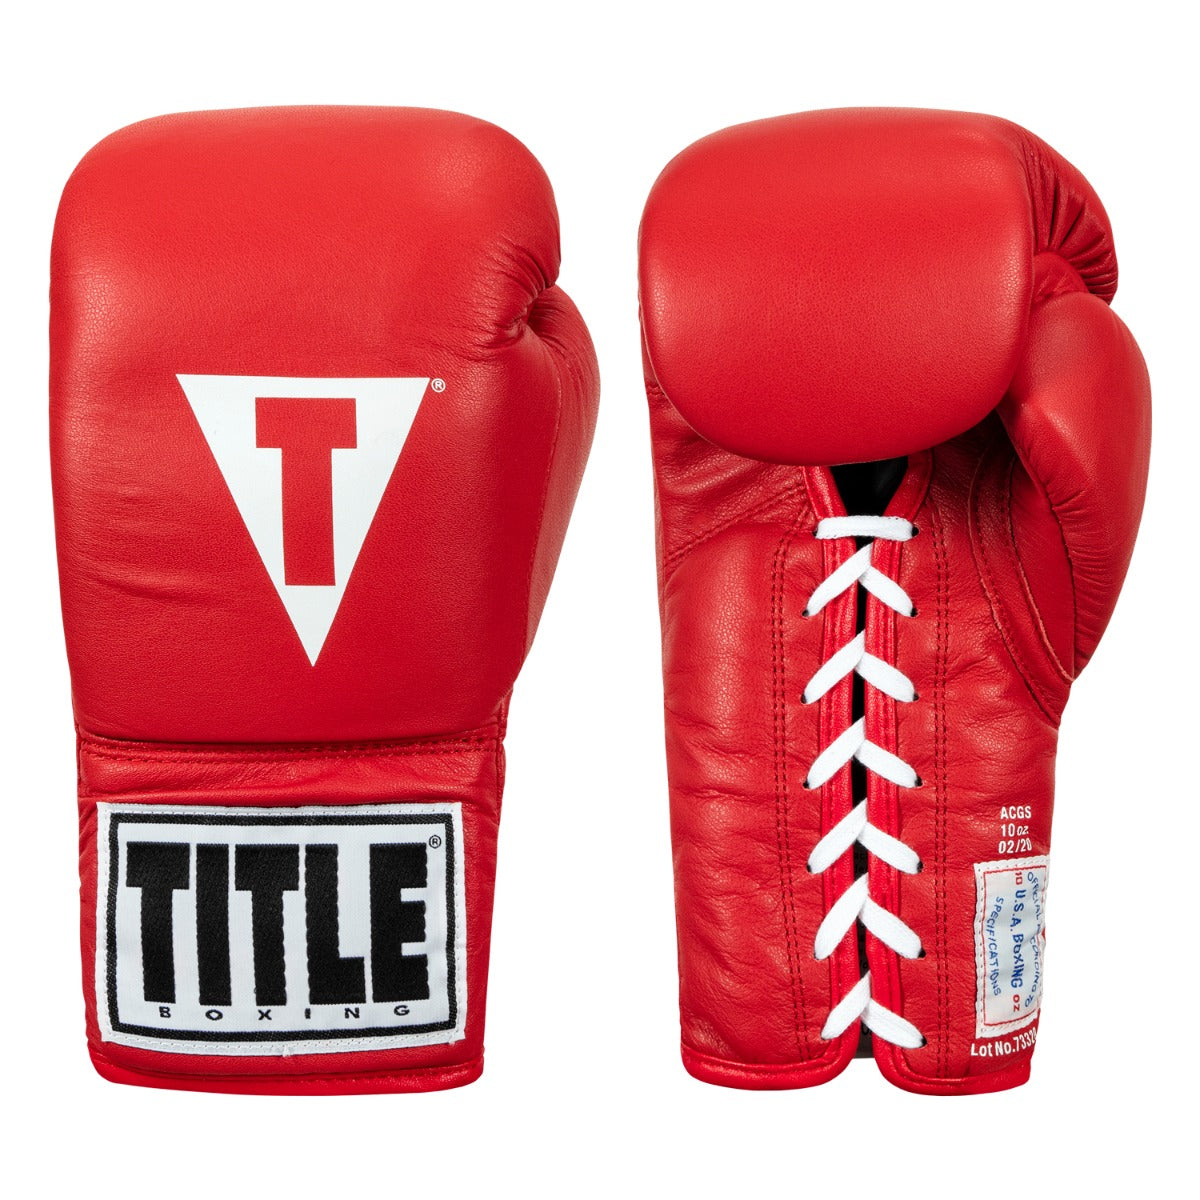 TITLE USA Boxing Competition Gloves - Lace